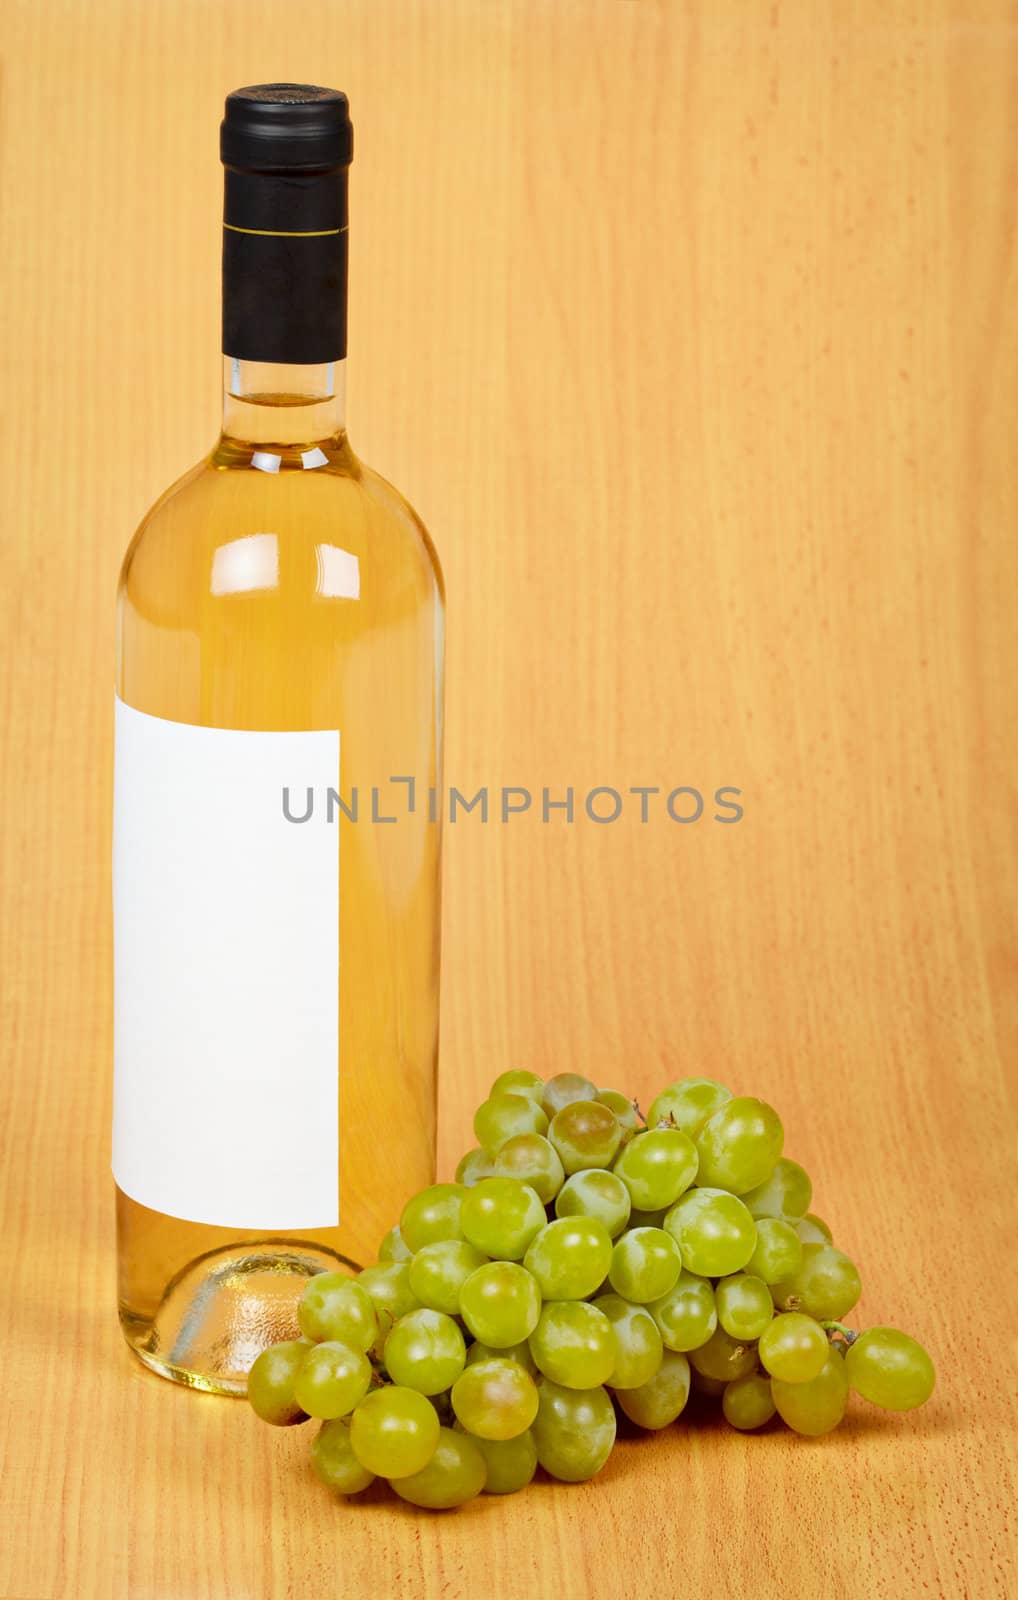 Still life - a bottle of white wine and grapes on a wooden surface